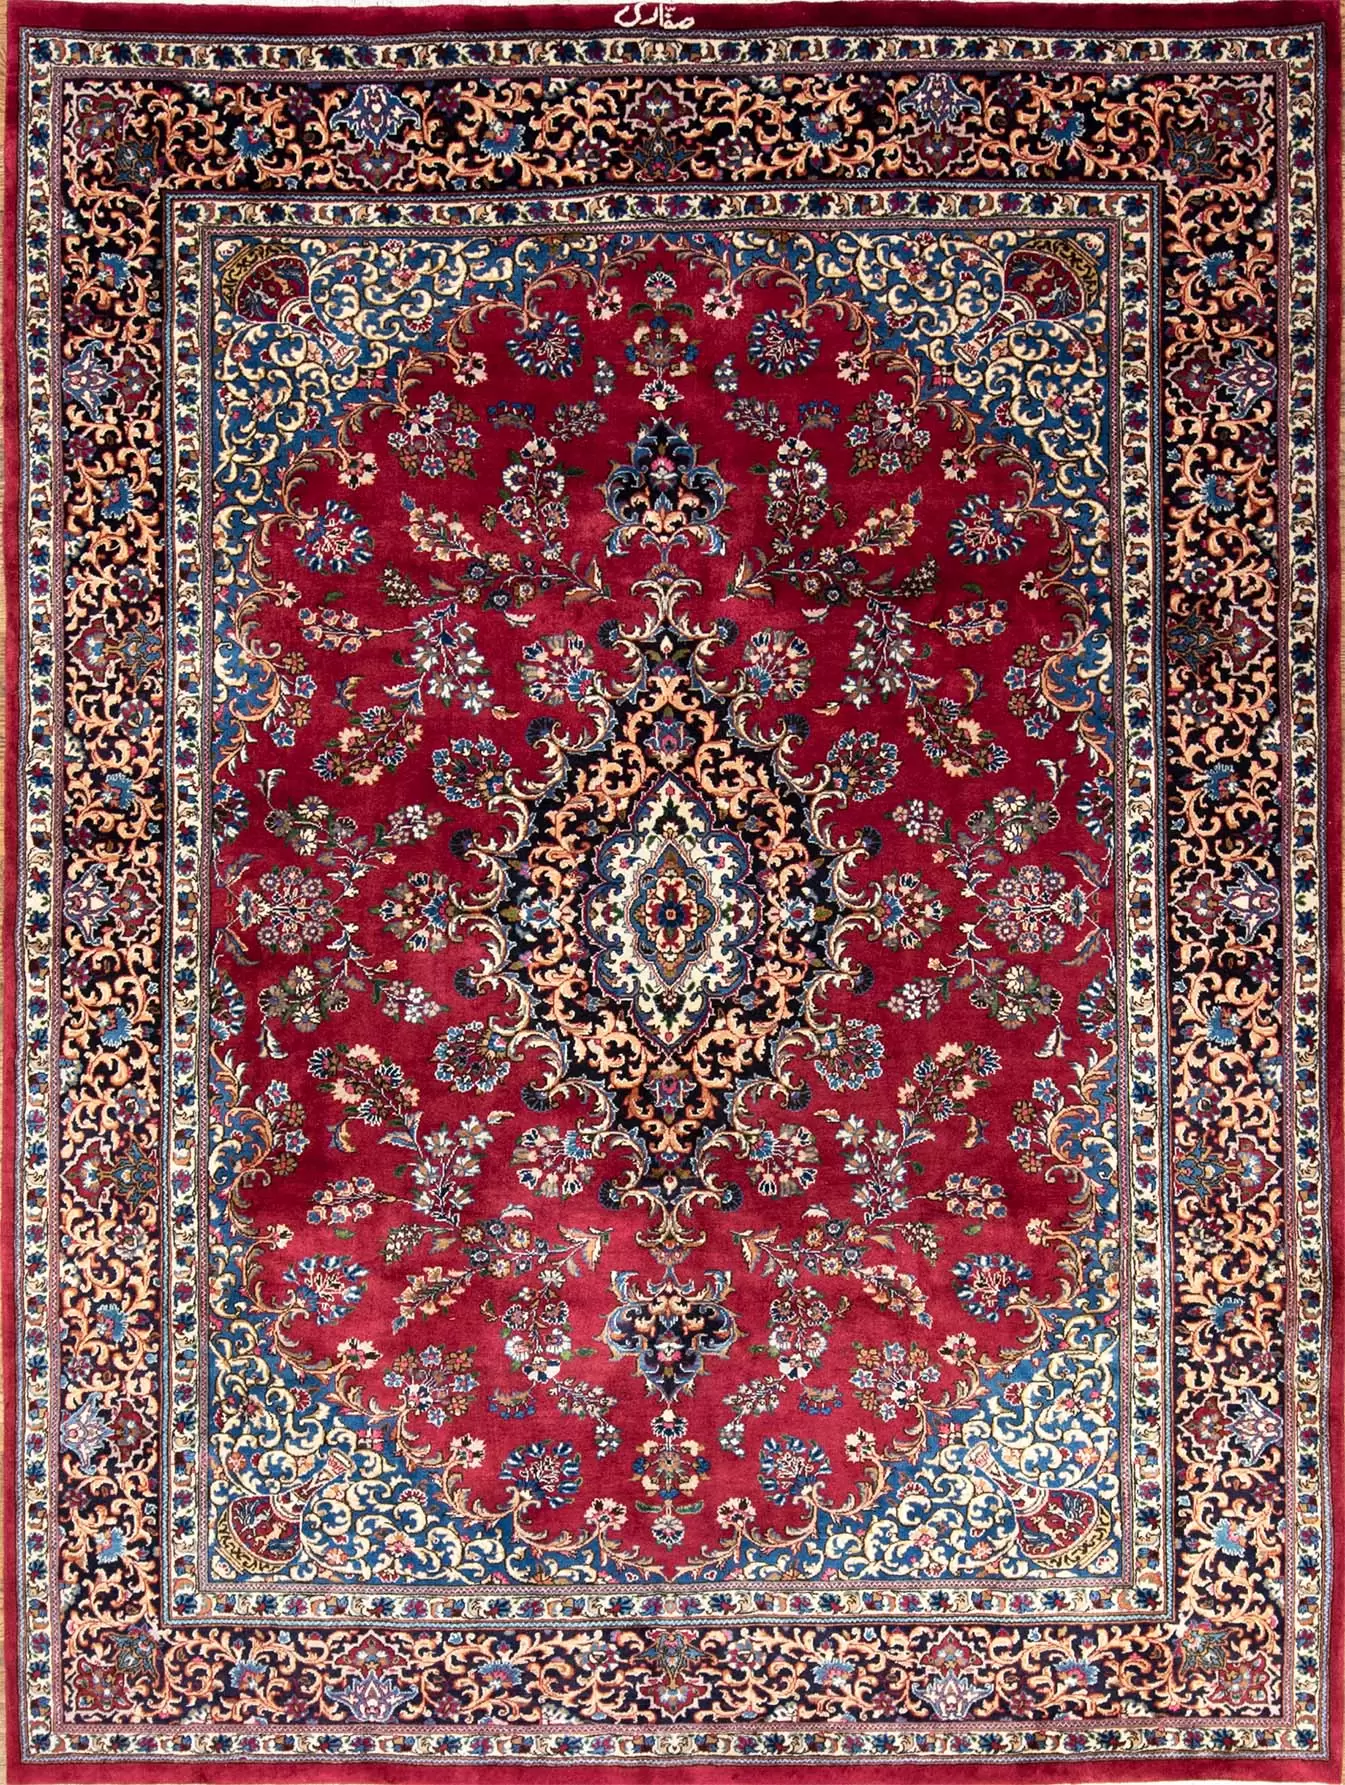 Persian style area rugs. Hand knotted wool Persian Sarouk rug area rug in red color made of wool. Size 8.3x10.9.